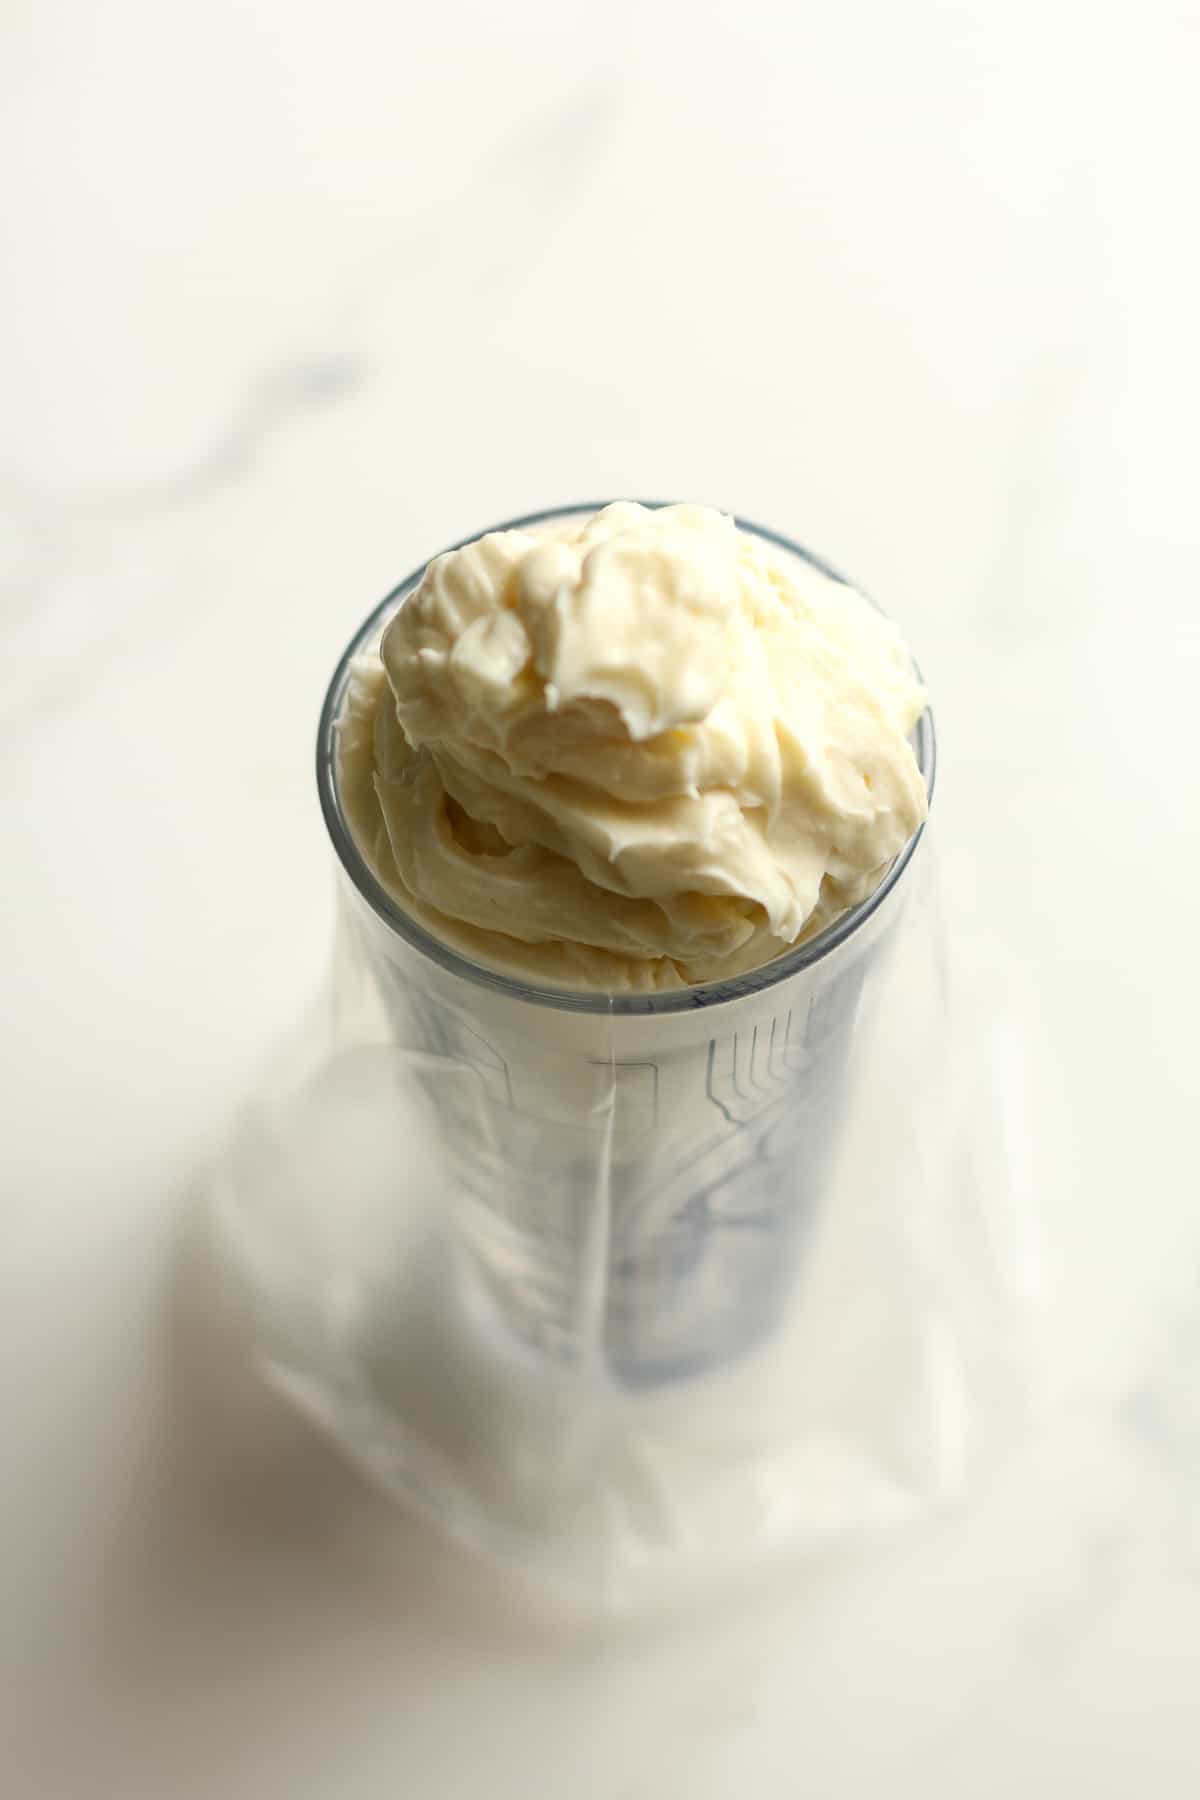 A glass with a piping bag full of the cream cheese mixture.